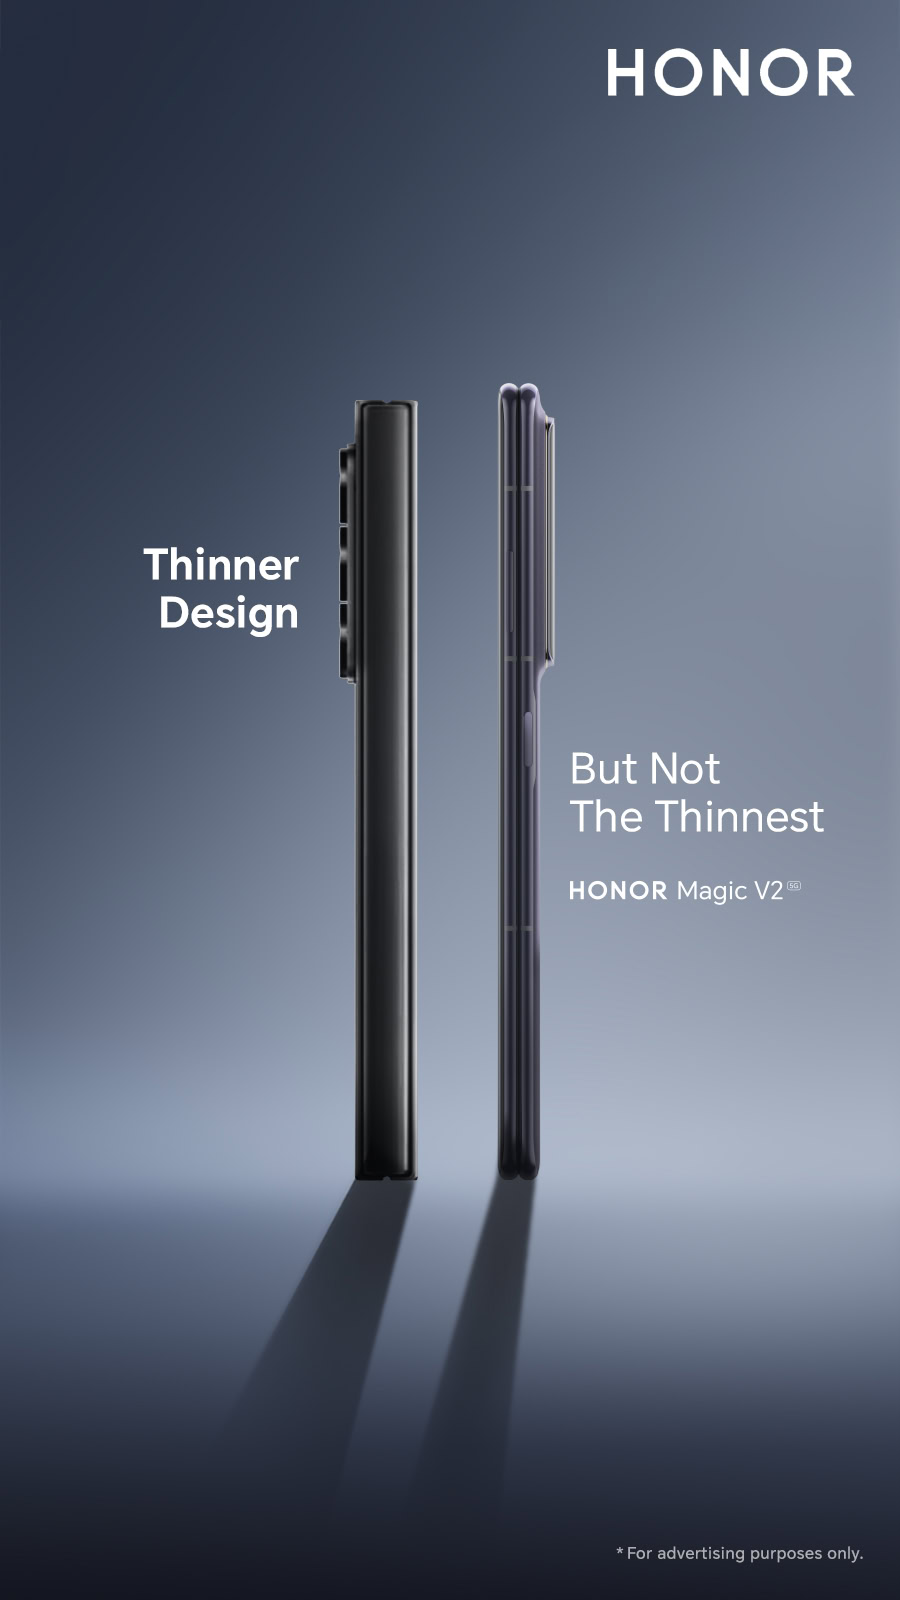 HONOR's tweet about the Galaxy Z Fold 6's thinner design claims